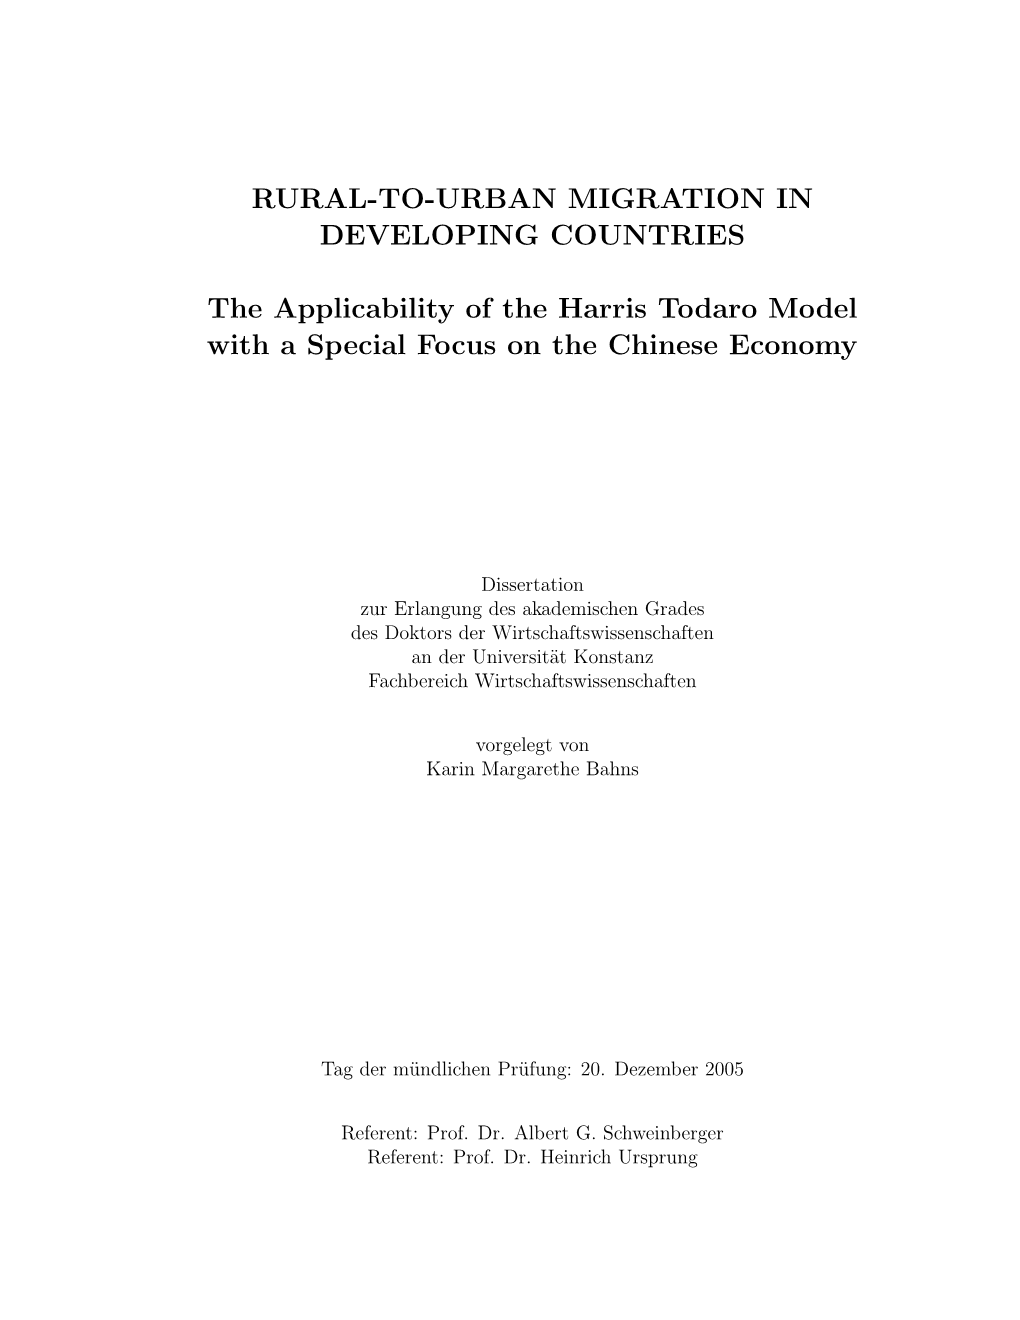 Rural-To-Urban Migration in Developing Countries